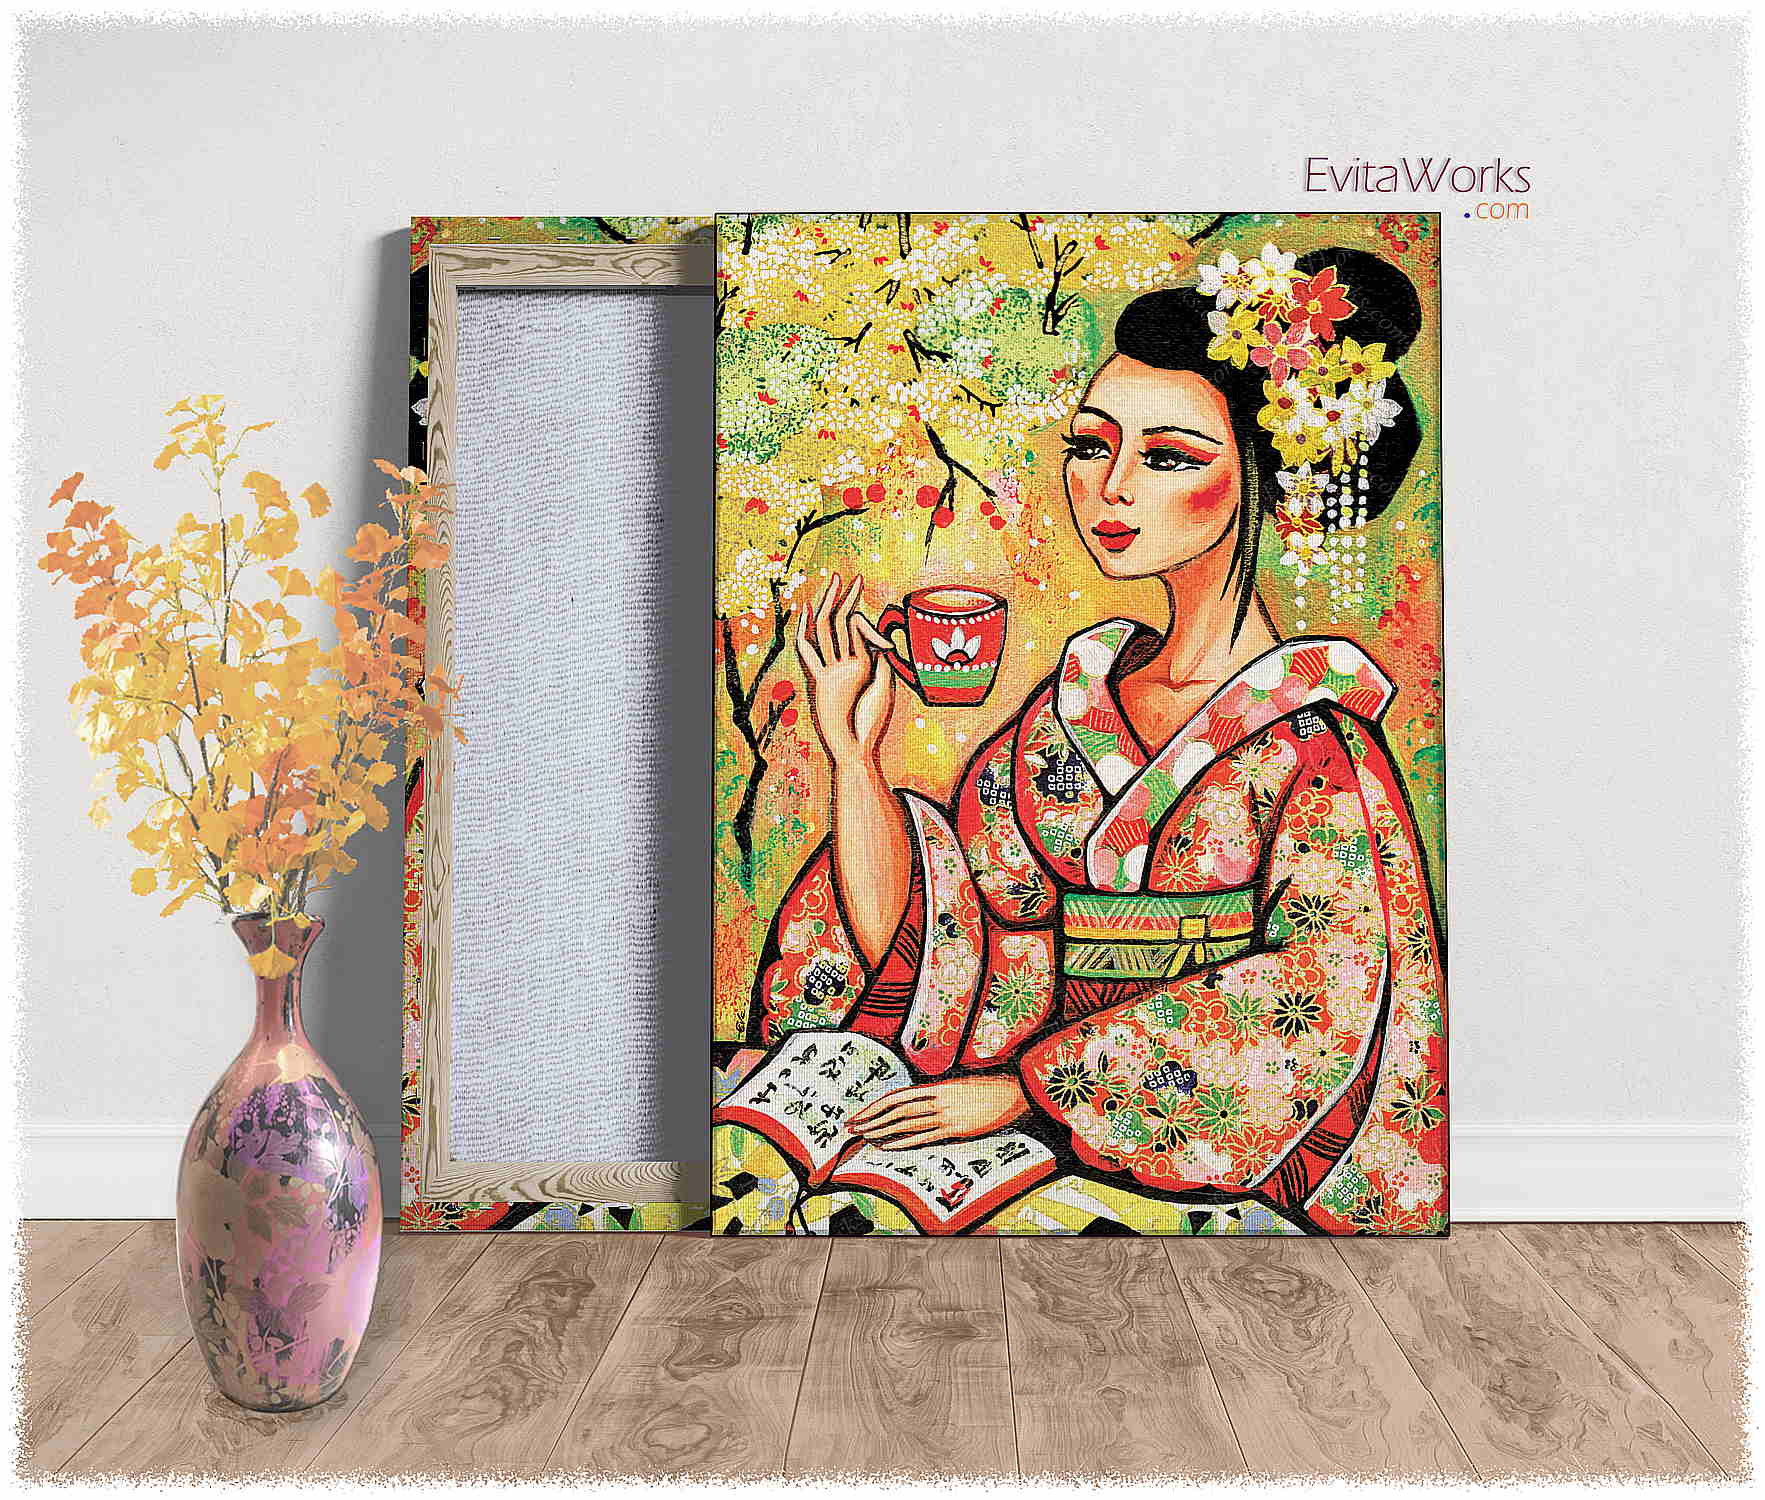 Hit to learn about "Tea in the Garden, kimono woman, beautiful Asian art" on canvases